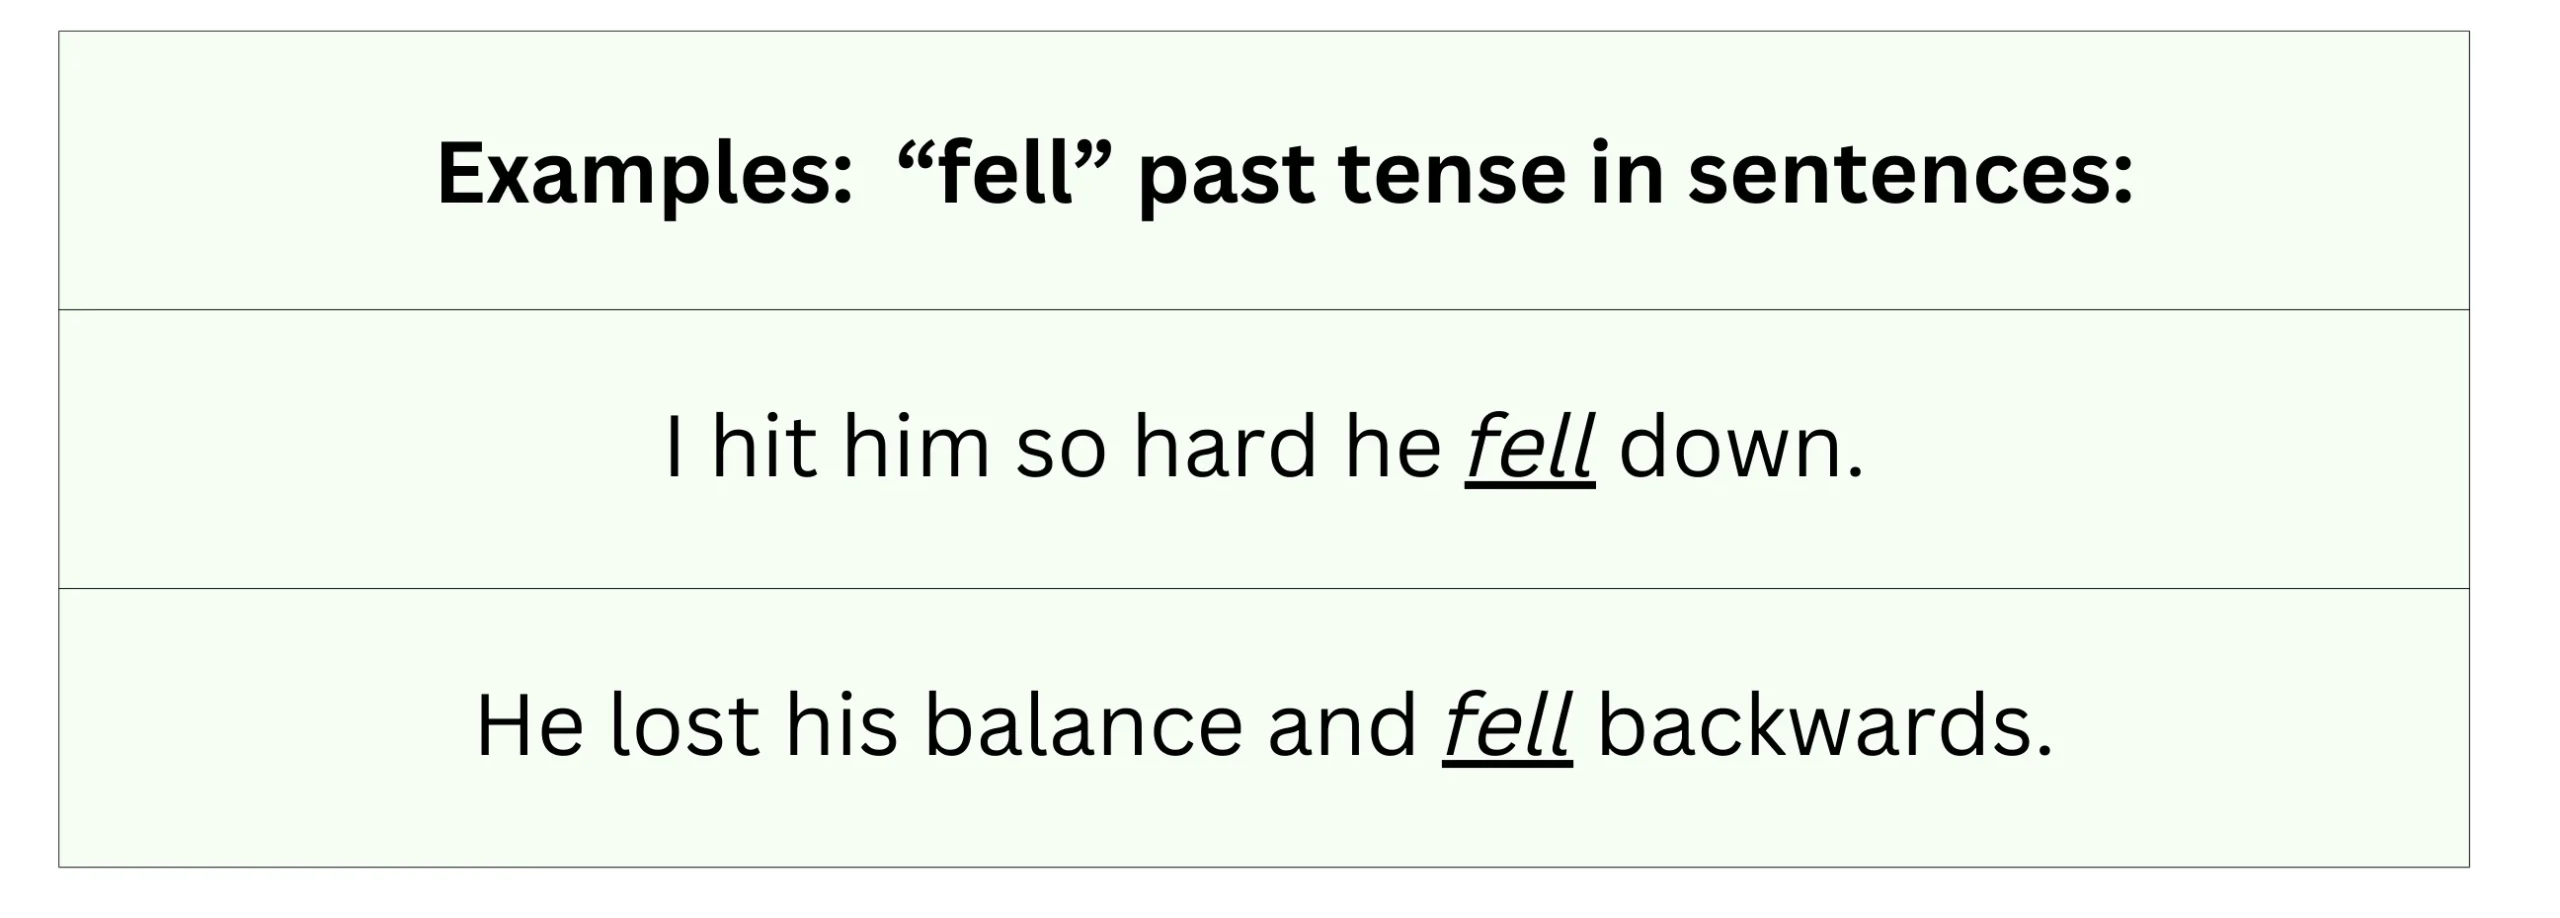 Examples of "fell" in the past tense.